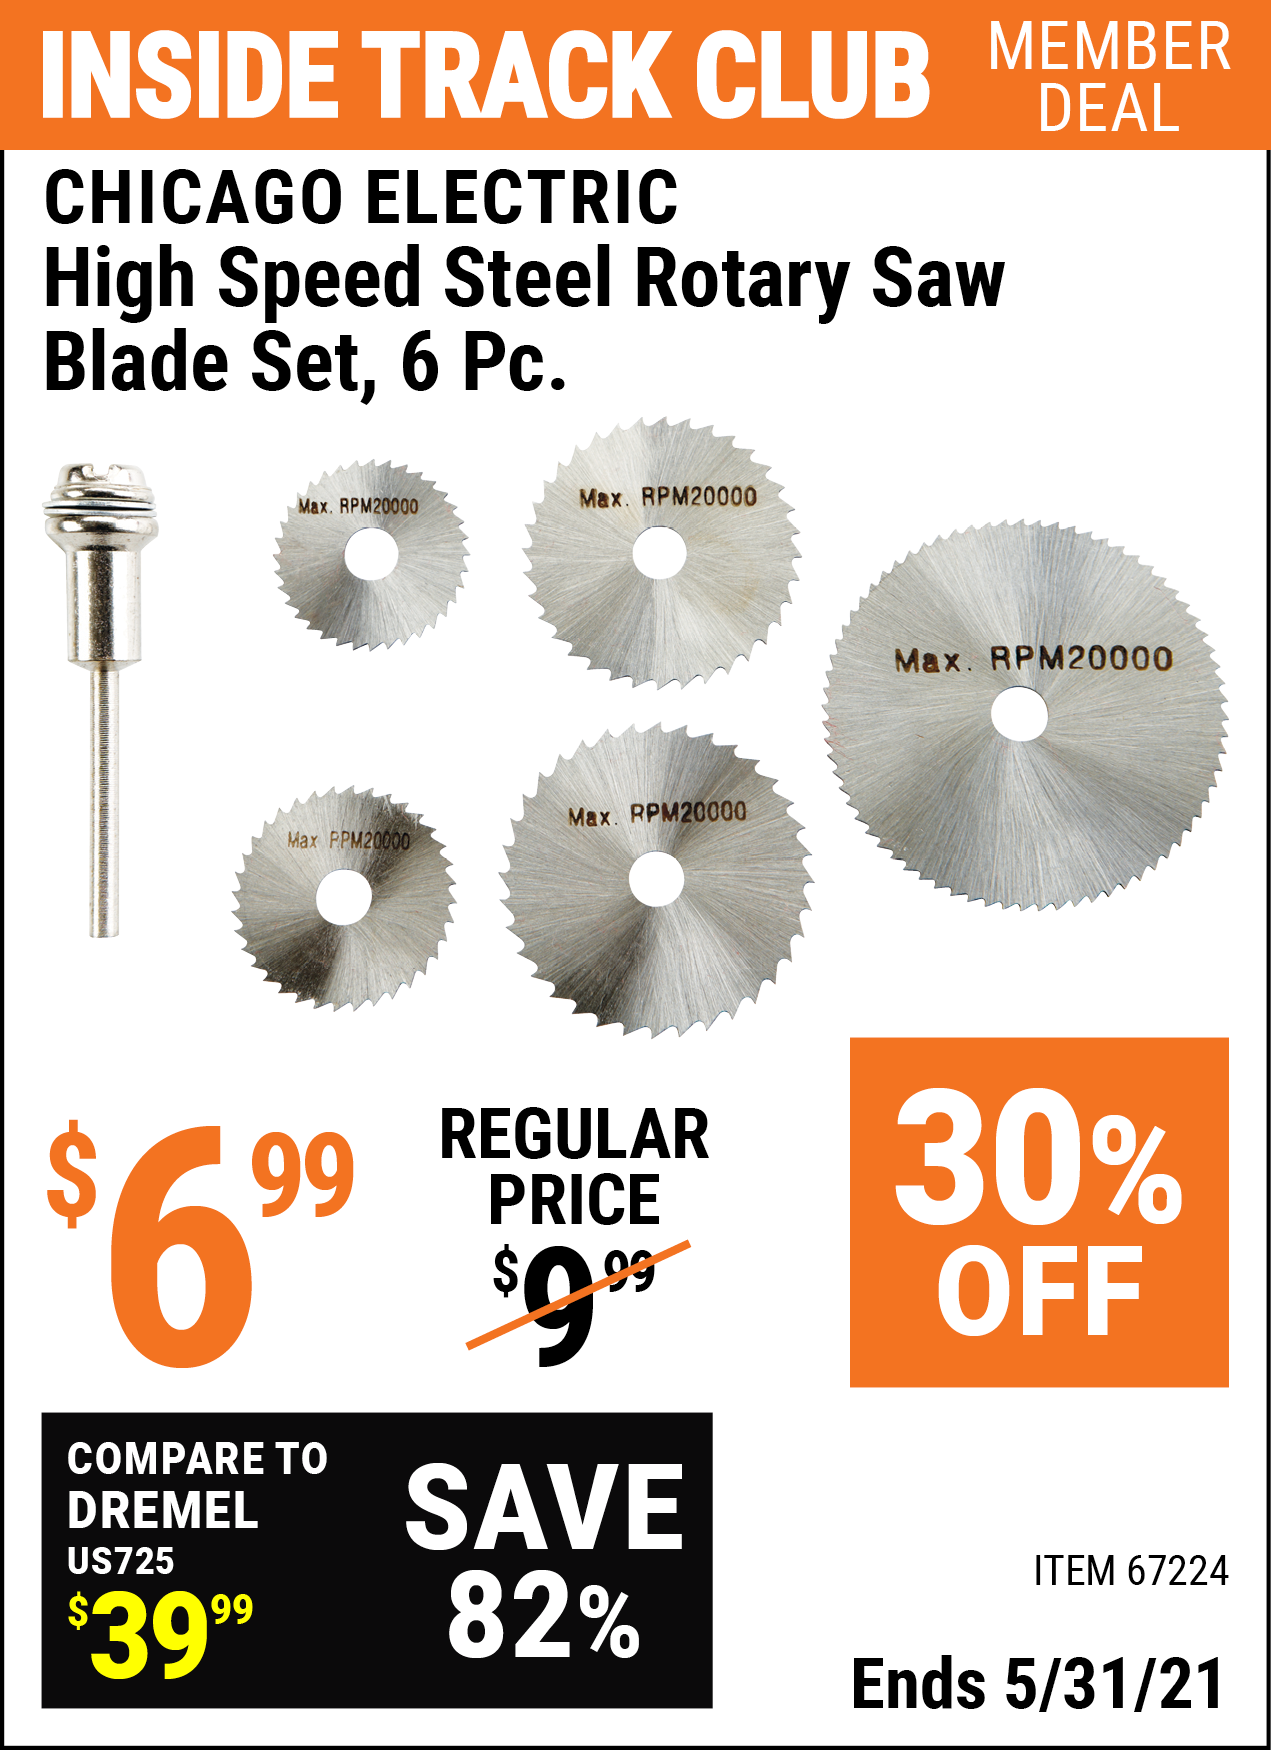 Inside Track Club members can buy the CHICAGO ELECTRIC High Speed Steel Rotary Saw Blade Set 6 Pc. (Item 67224) for $6.99, valid through 5/31/2021.